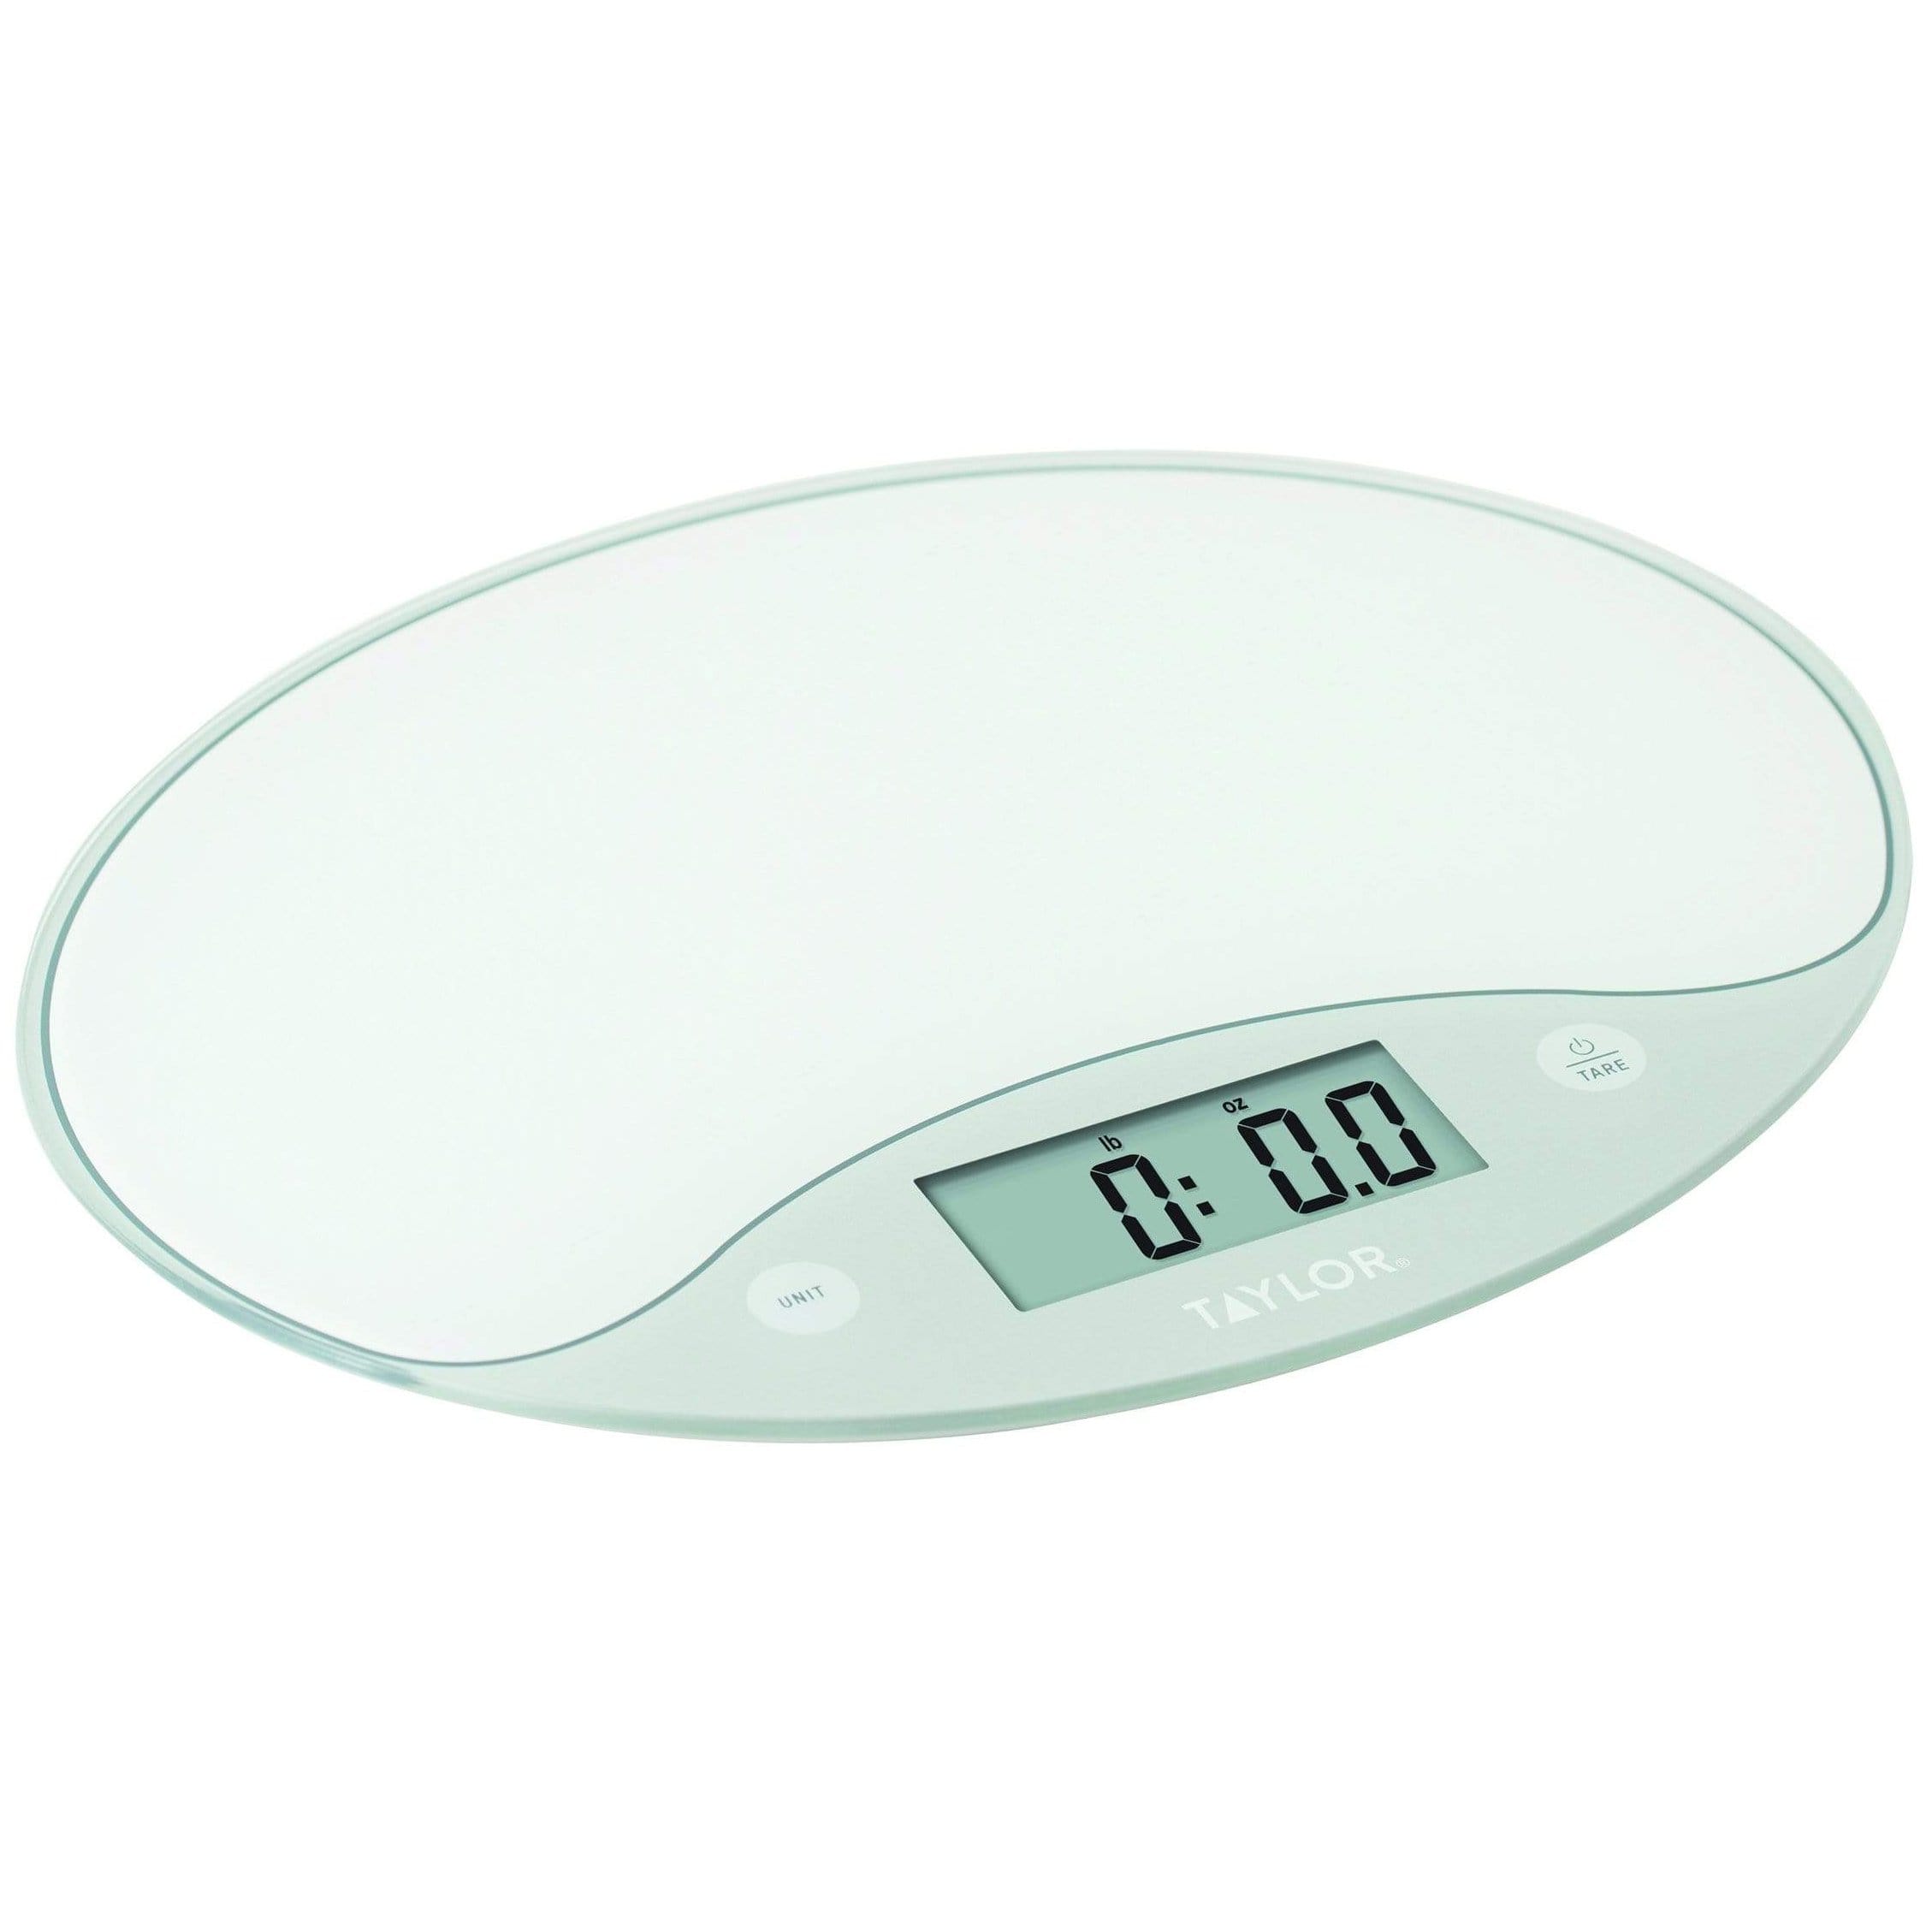 Taylor Digital Glass Platform White Base Food Scale and Kitchen Scale